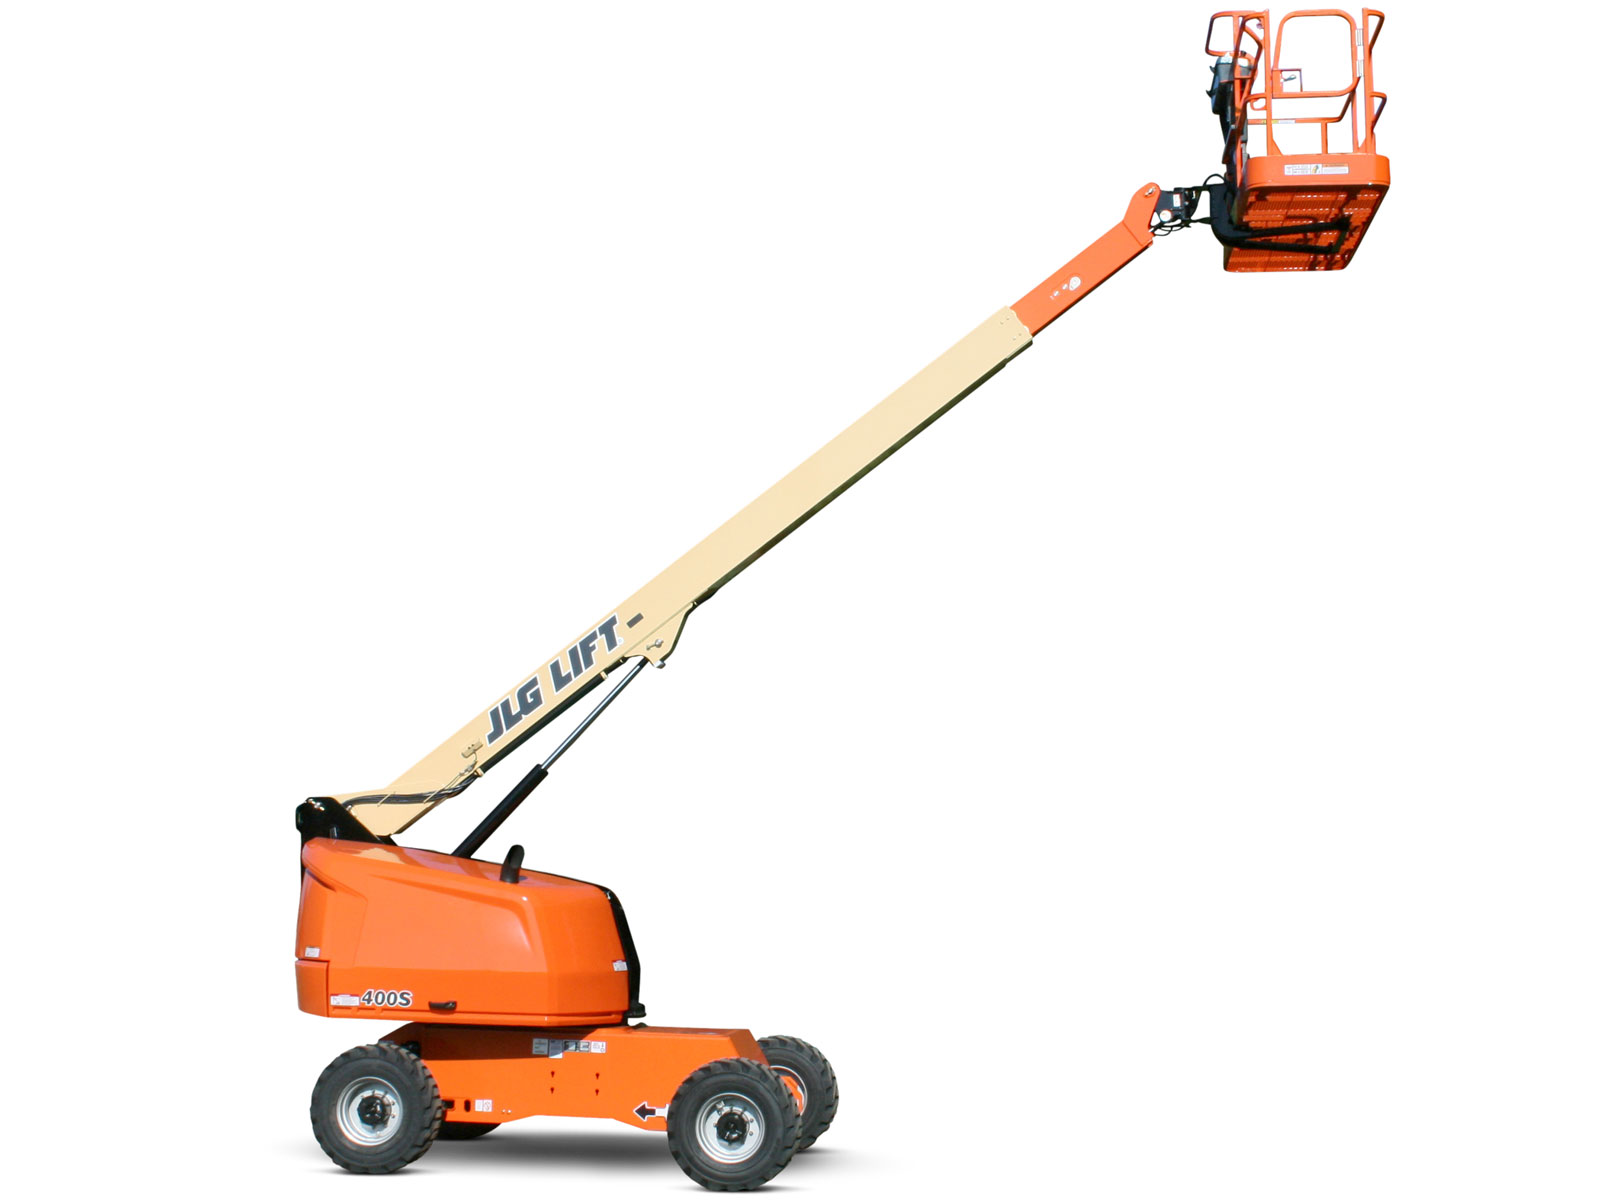 60 foot used straight boom lift for sale